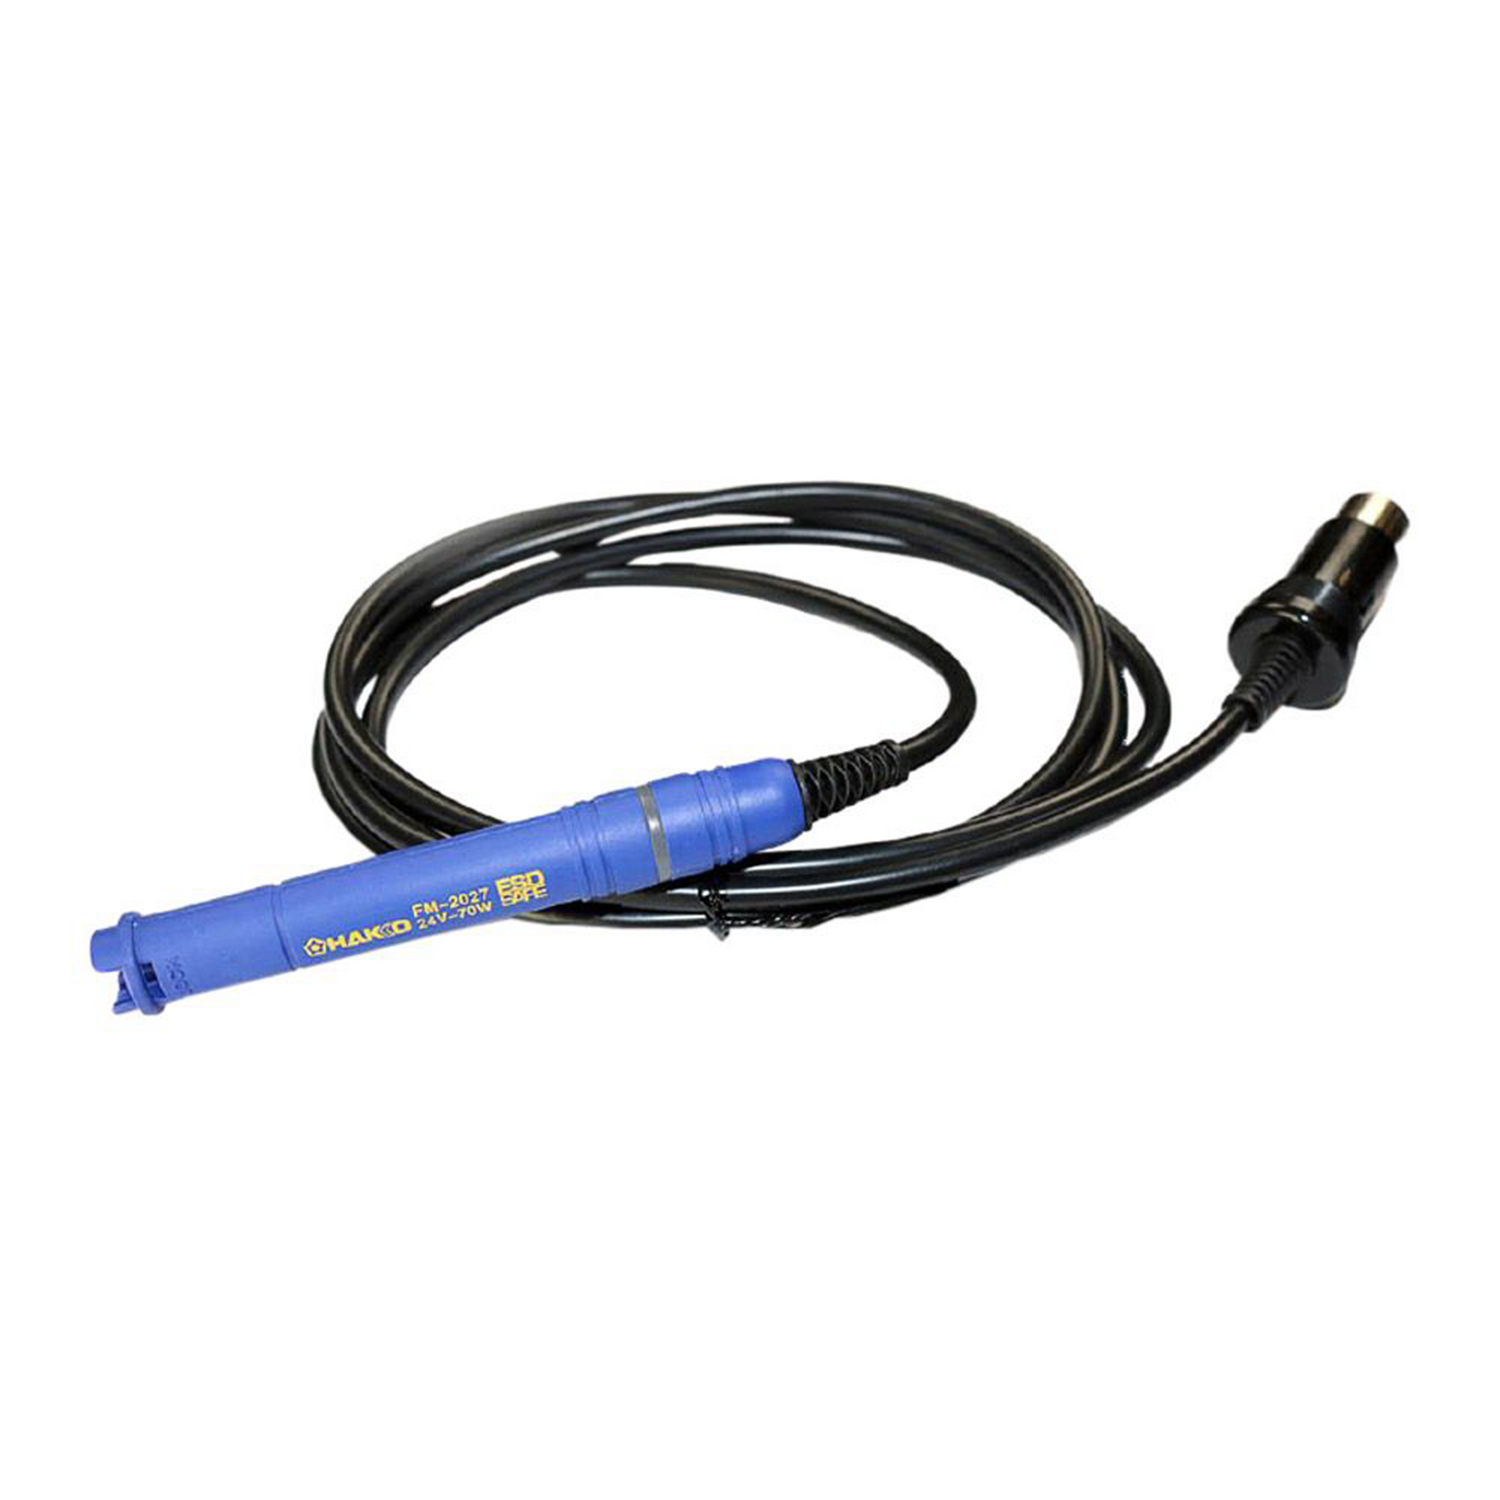 Hakko soldering iron FM2028 handpiece only for FX951 soldering station 75W to solder onto printed circuit board for SMT assembly production lines